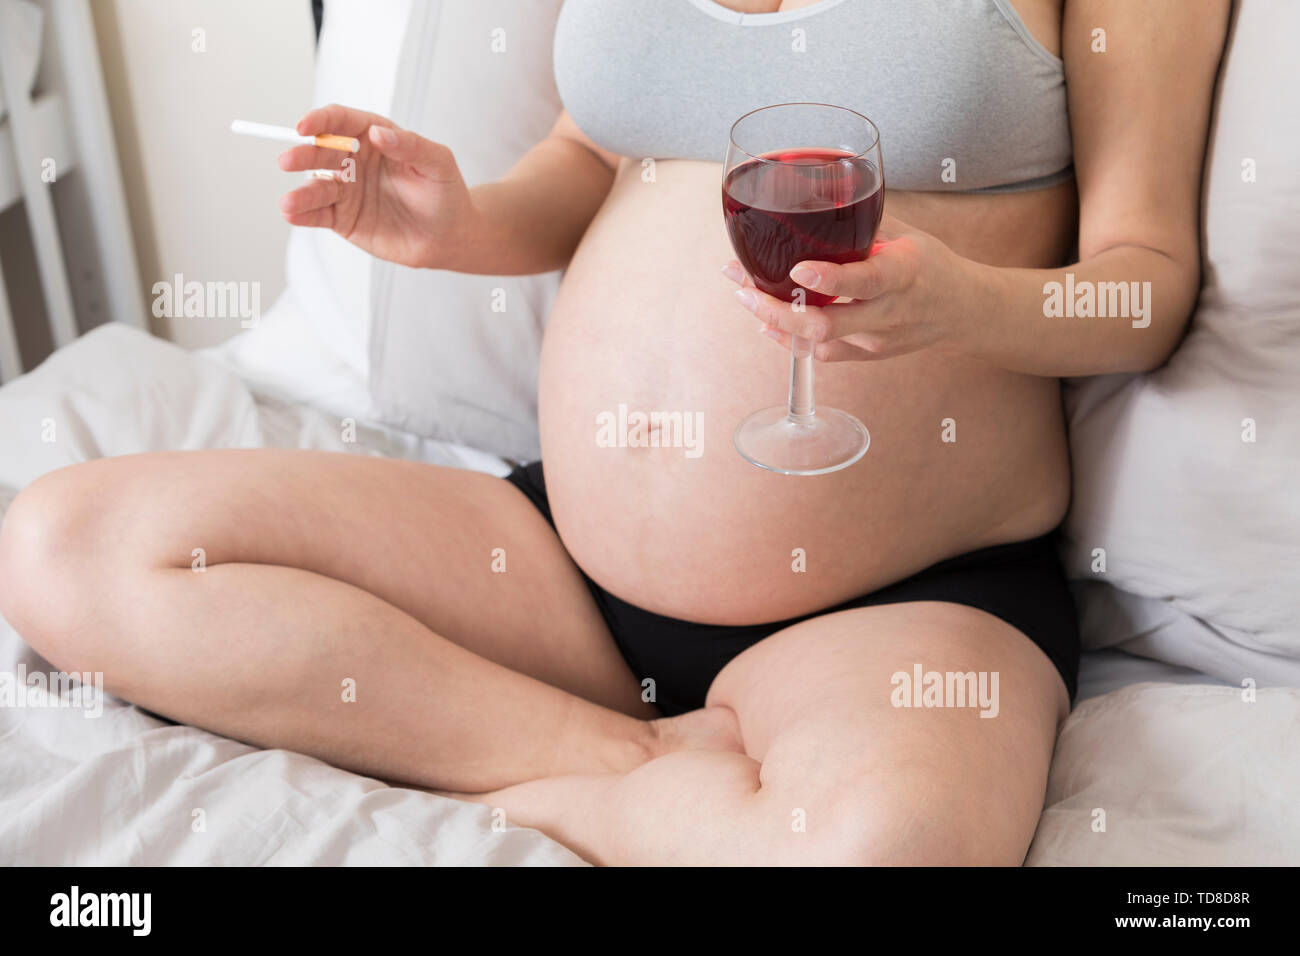 Young Pregnant woman smoking cigarettes and drinking alcohol, women in pregnancy with tobacco and glass of wine, unhealthy habits and abuse Stock Photo